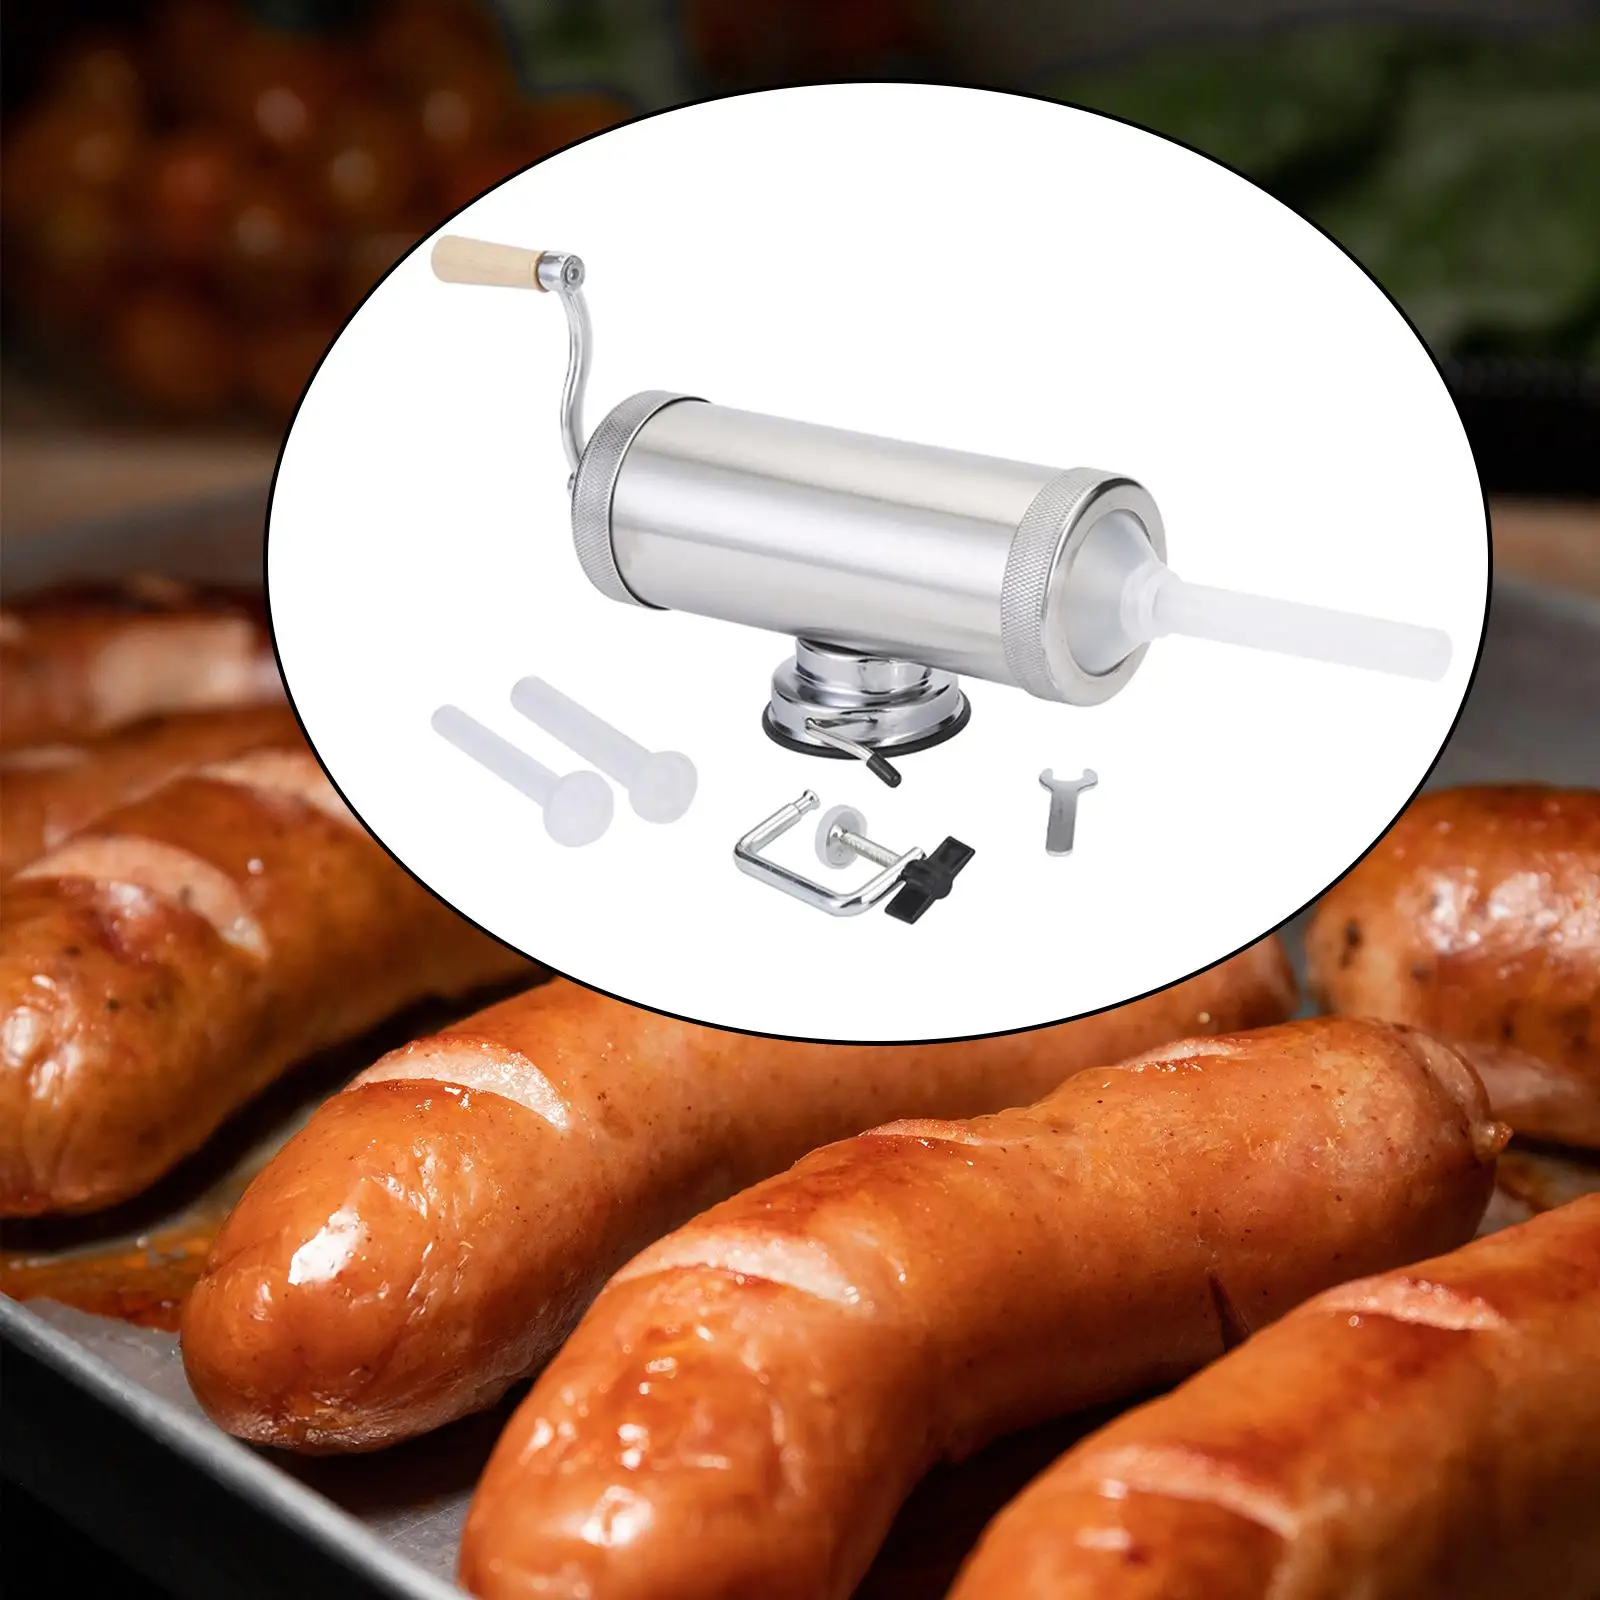 Manual Sausage Maker 5lbs Effective Household Stainless Steel with 3 Nozzles Kitchen Accessories Sausage Meat Filling Tools